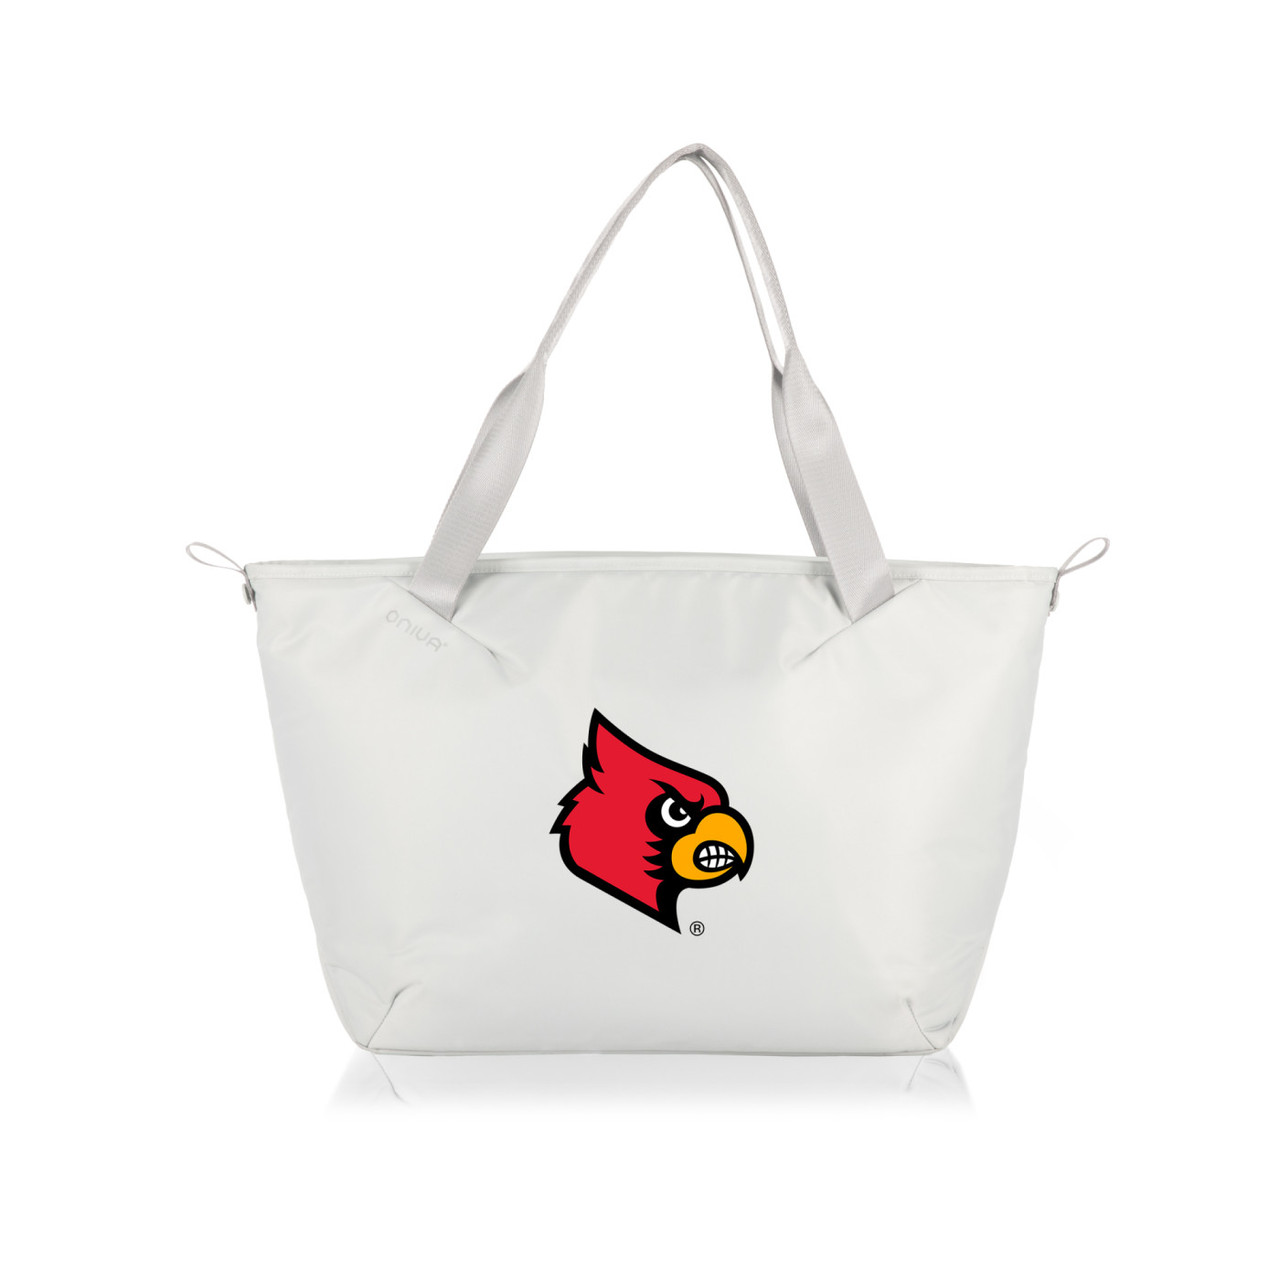 Louisville Cardinals Tailgating Gear - SportsUnlimited.com